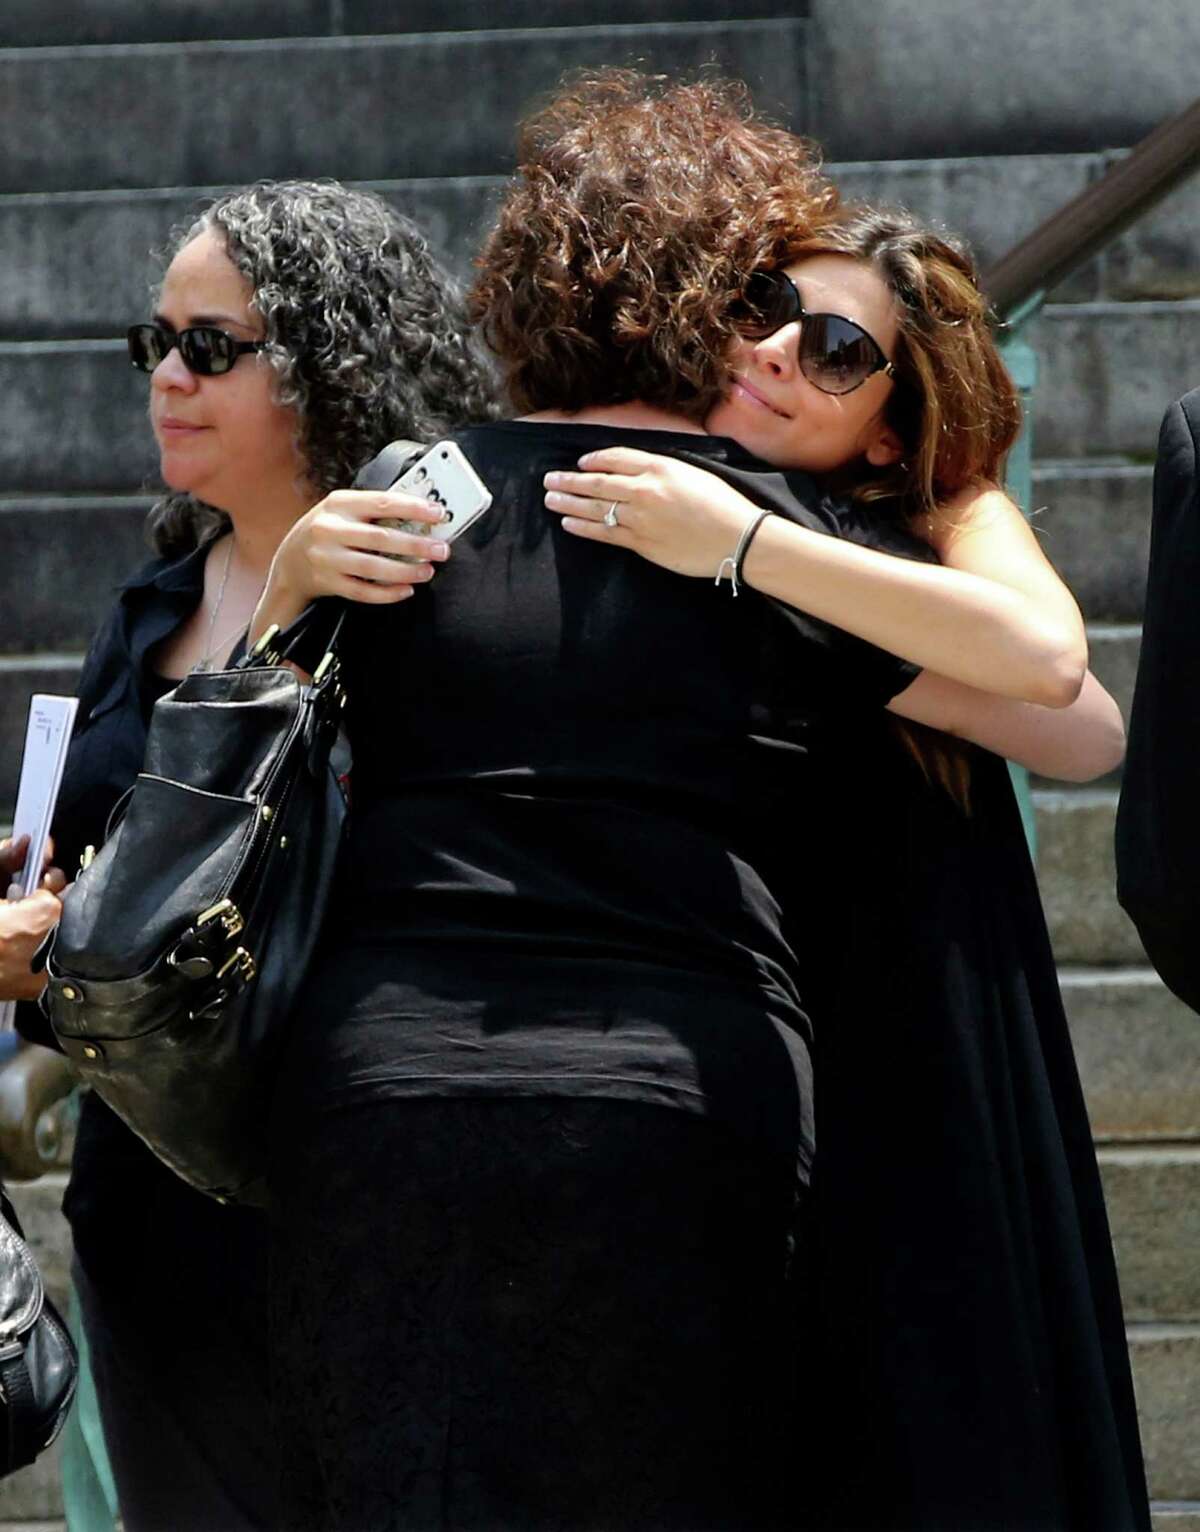 Actress Jamie Lynn Sigler, right, is embraced as she leaves the Cathedral Church of Saint John the Divine after the funeral service for James Gandolfini, Thursday, June 27, 2013 in New York. Gandolfini, who played Tony Soprano in the HBO show "The Sopranos", died while vacationing in Italy last week.